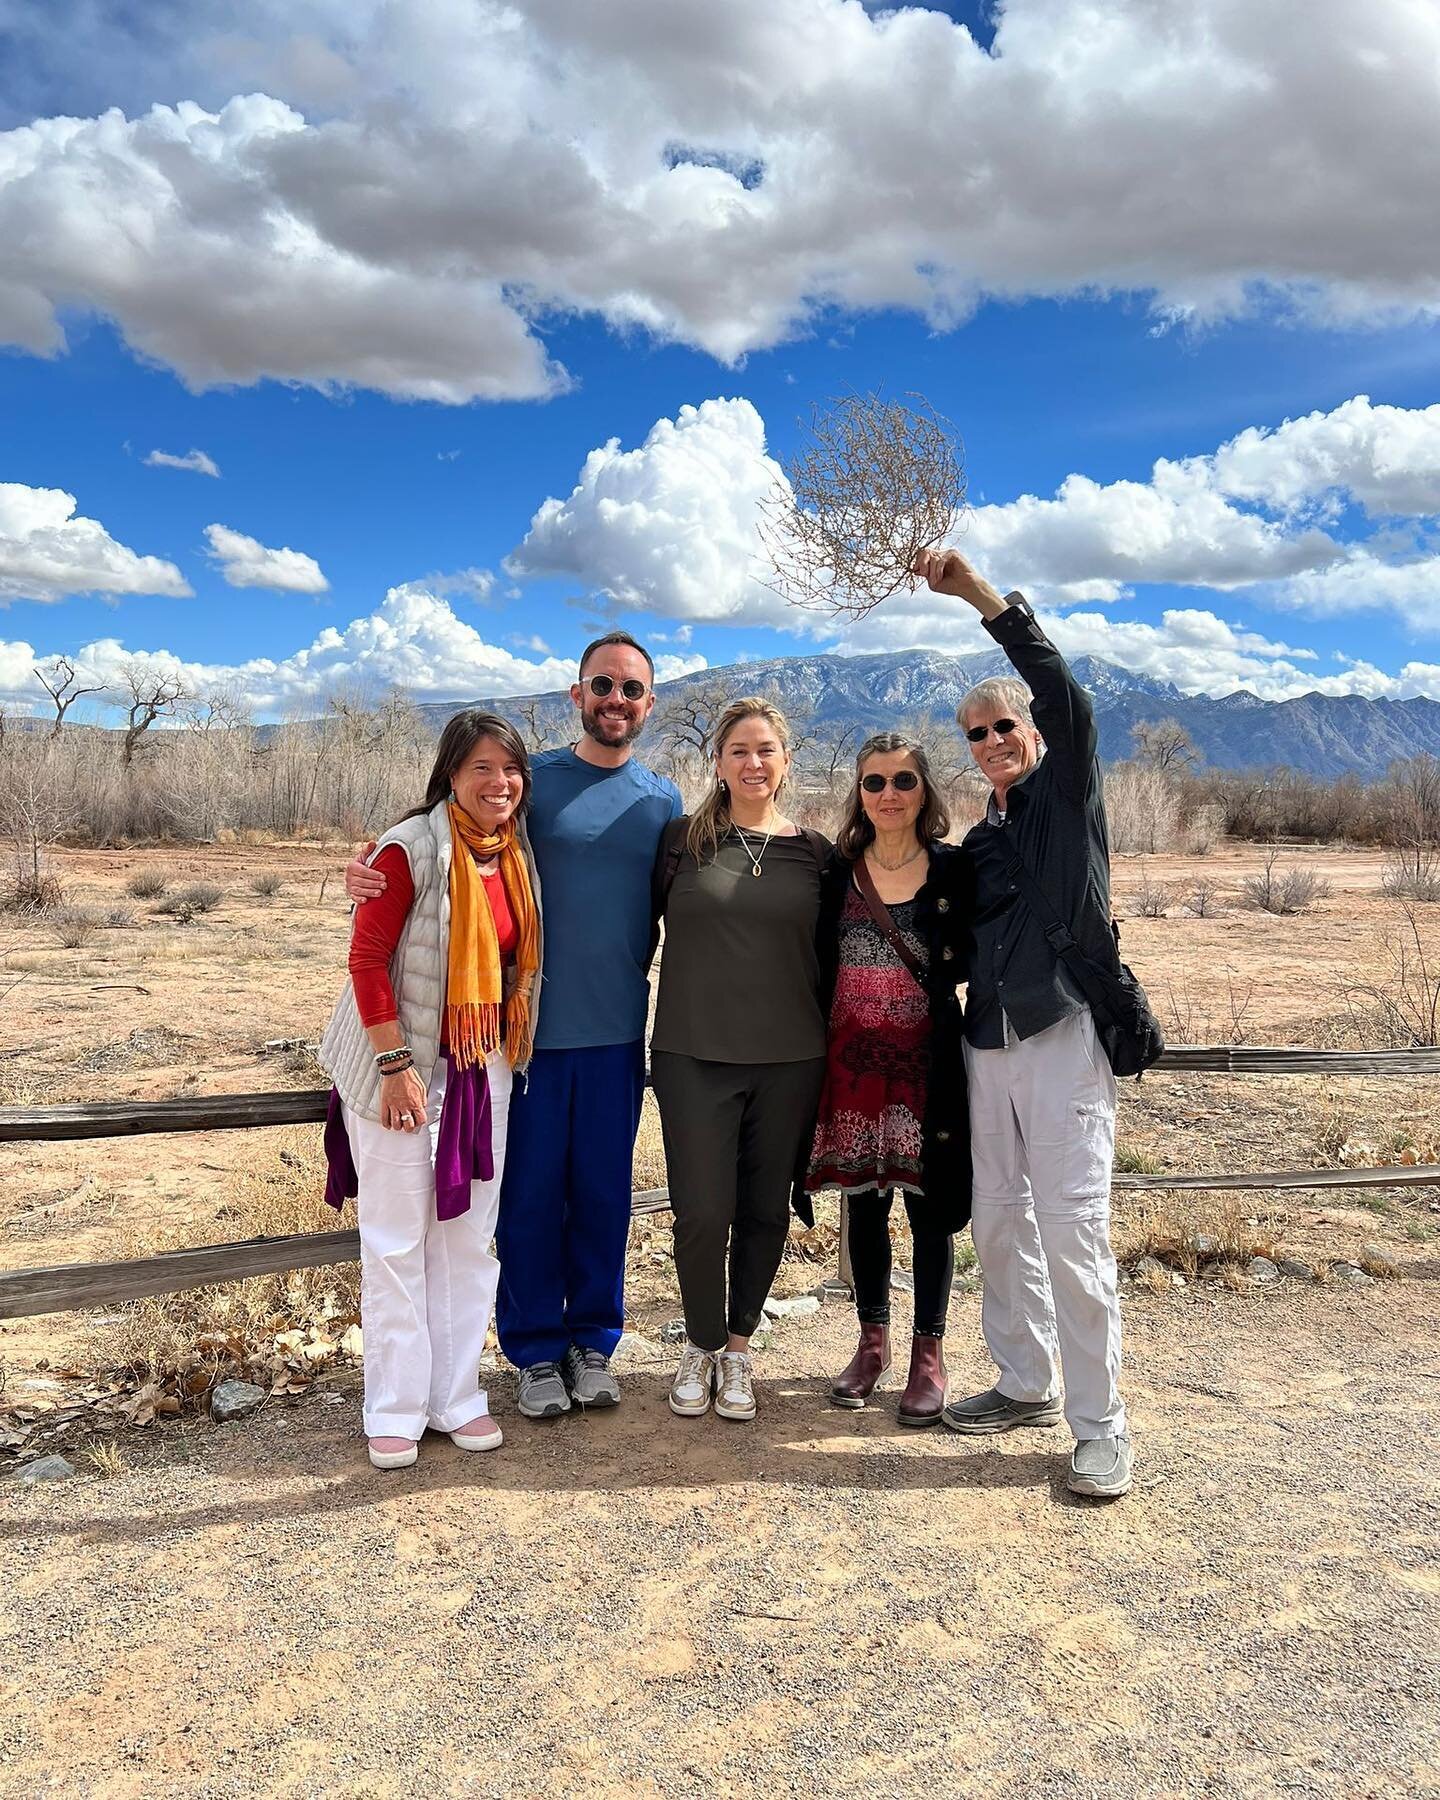 Peace and chi, breathe and believe! #purehuman #breathwork with #greggbraden and breath family.

On the final night, we breathed the sound of the sacred vowels with a circle of open hearts around the fire, and out of nowhere, the winds and the rains 